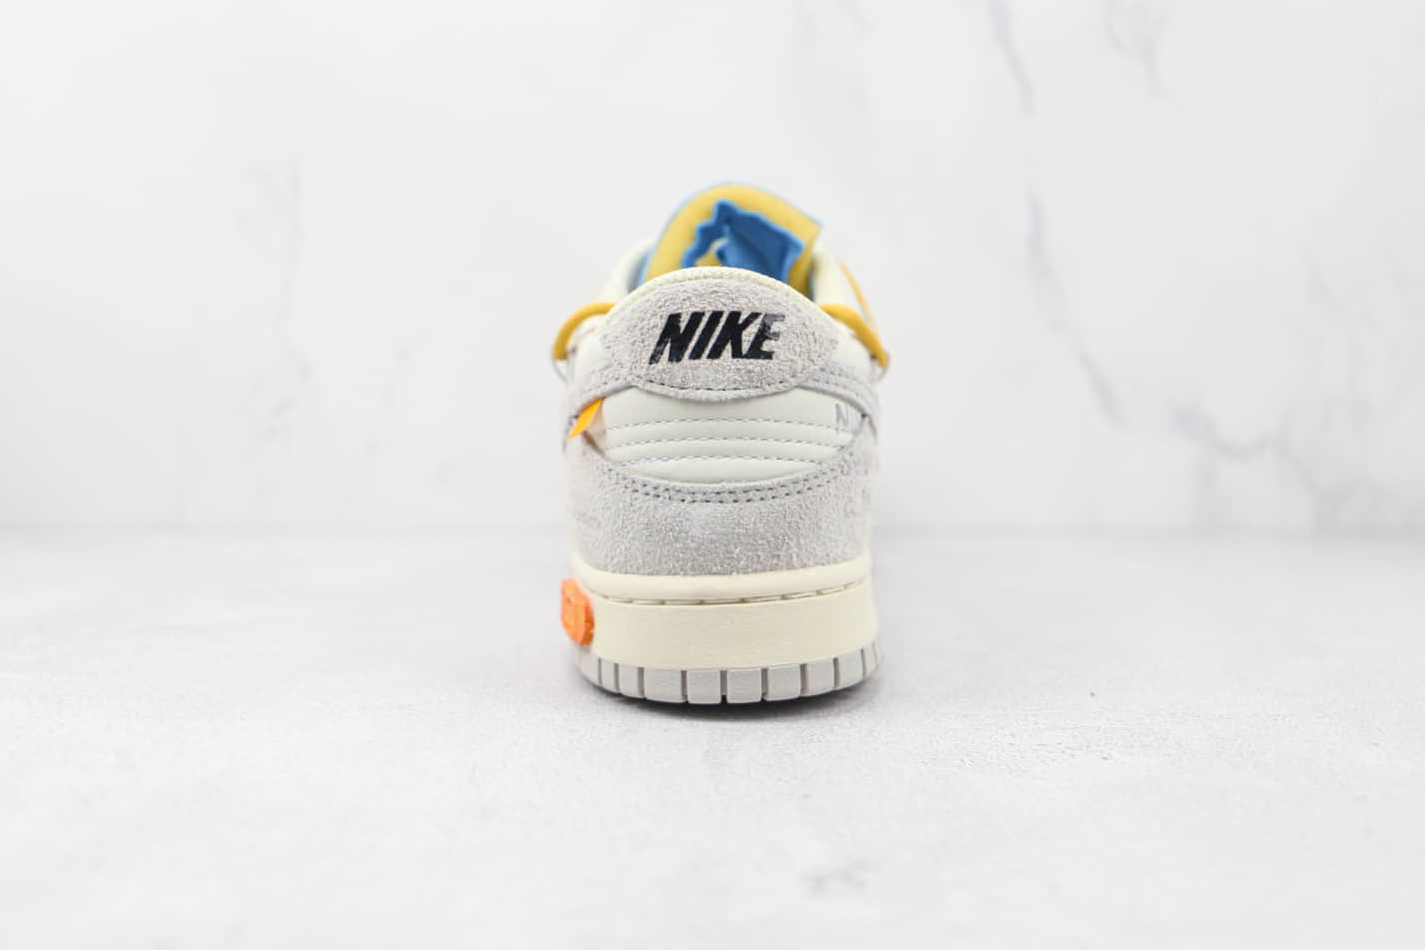 Nike Off-White x Dunk Low 'Lot 34 of 50' DJ0950-102 – Limited Edition Collaboration Sneakers